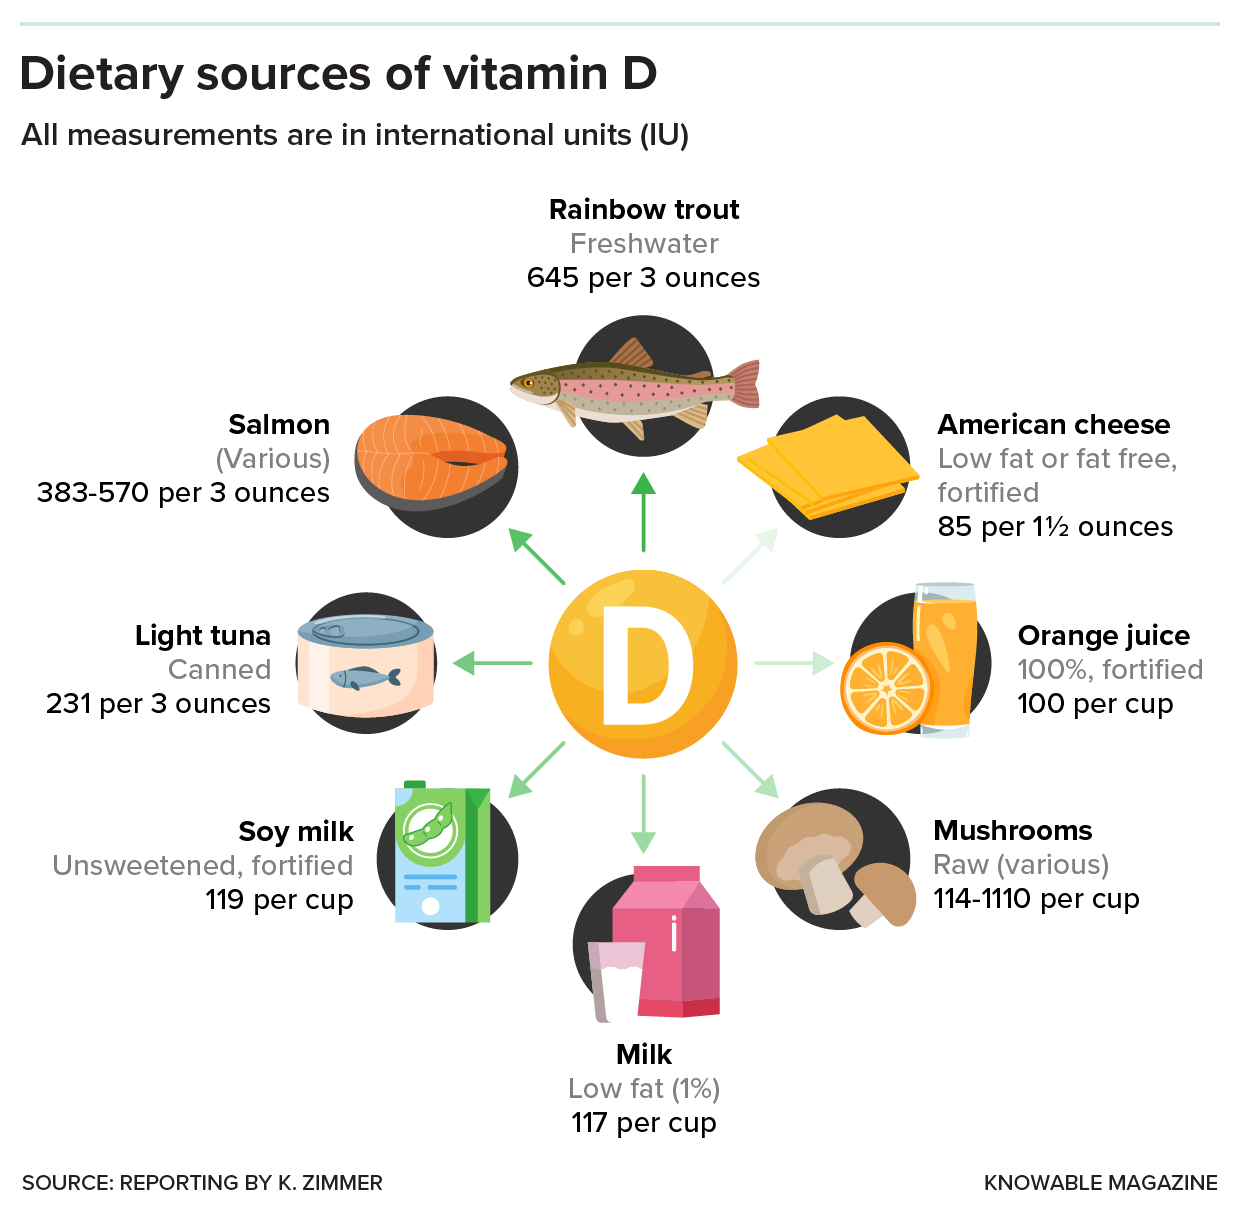 A few common food items can deliver a significant portion of your daily vitamin D needs, either because they are naturally rich in it or because they are fortified with the vitamin. Credit: Knowable Magazine